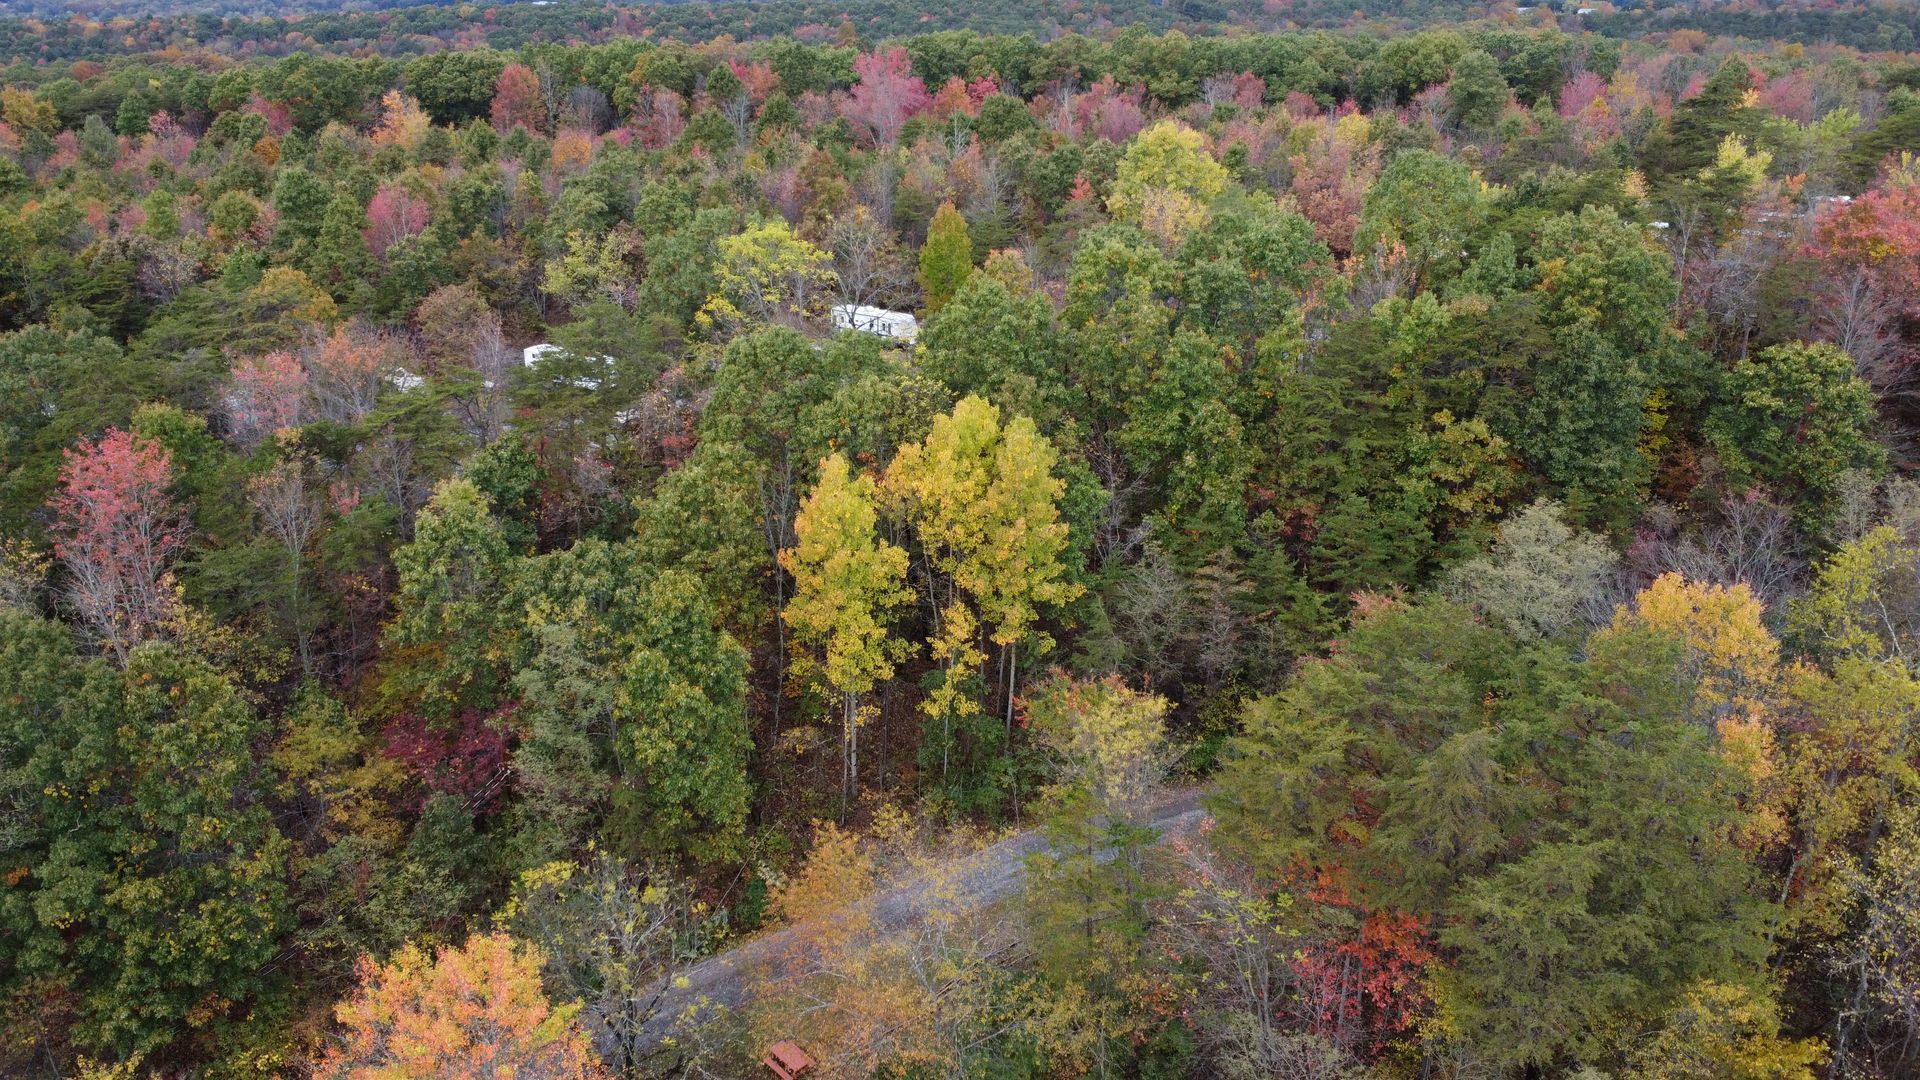 An aerial view of a forest with trees that are changing colors in the fall.